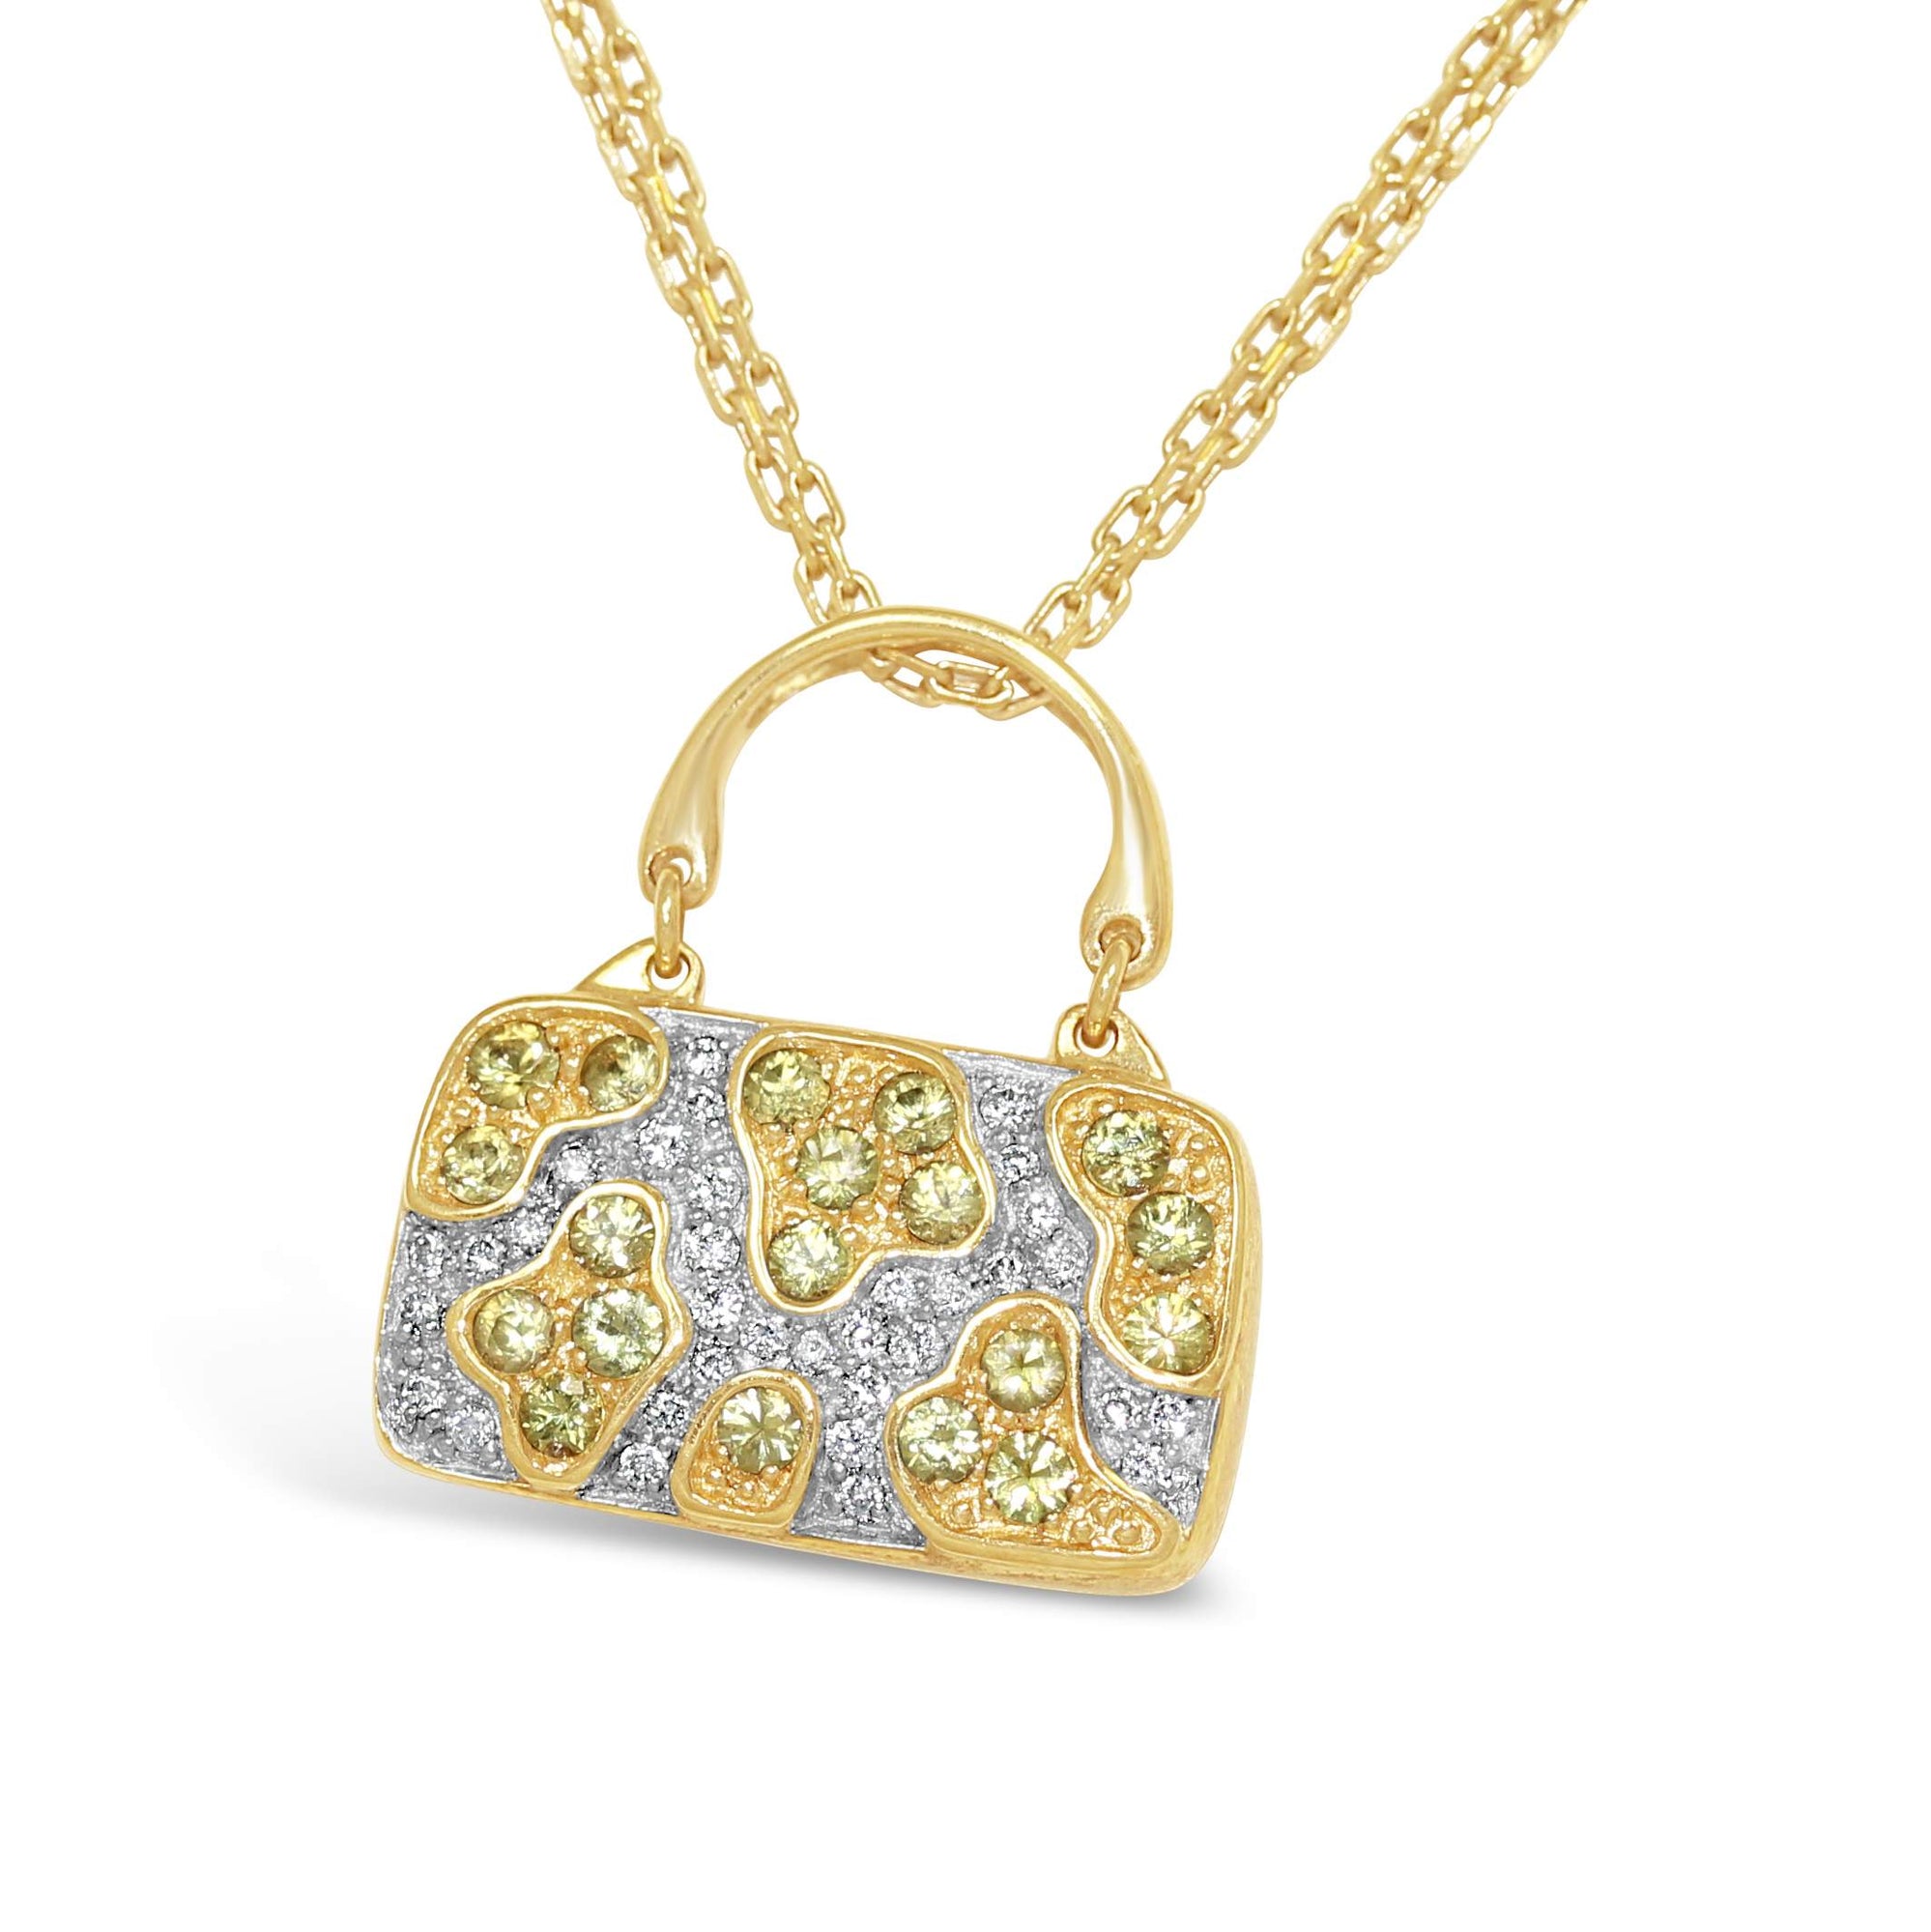 MIRABELLE YELLOW SAPPHIRE AND DIAMOND PURSE NECKLACE